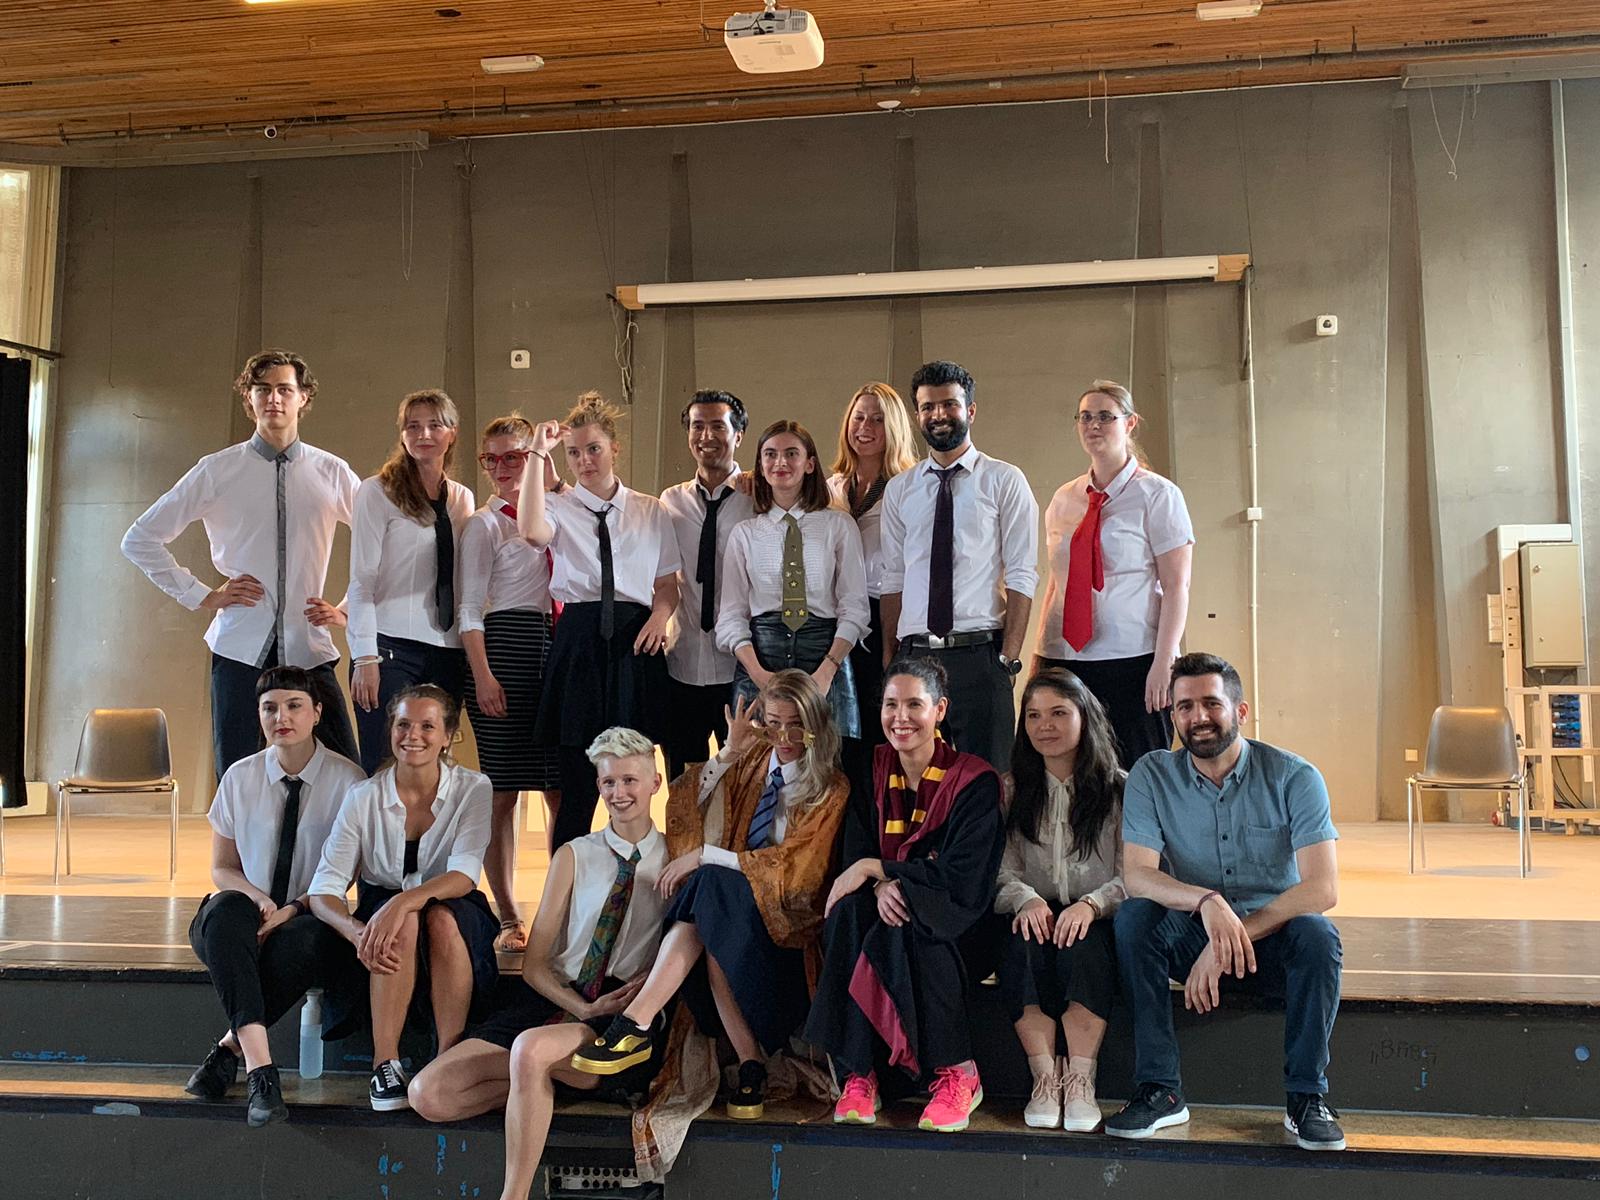 Photo from the rehearsal of the show "the magic school". A group of people pose for the picture. Most of them wear a white shirt and tie